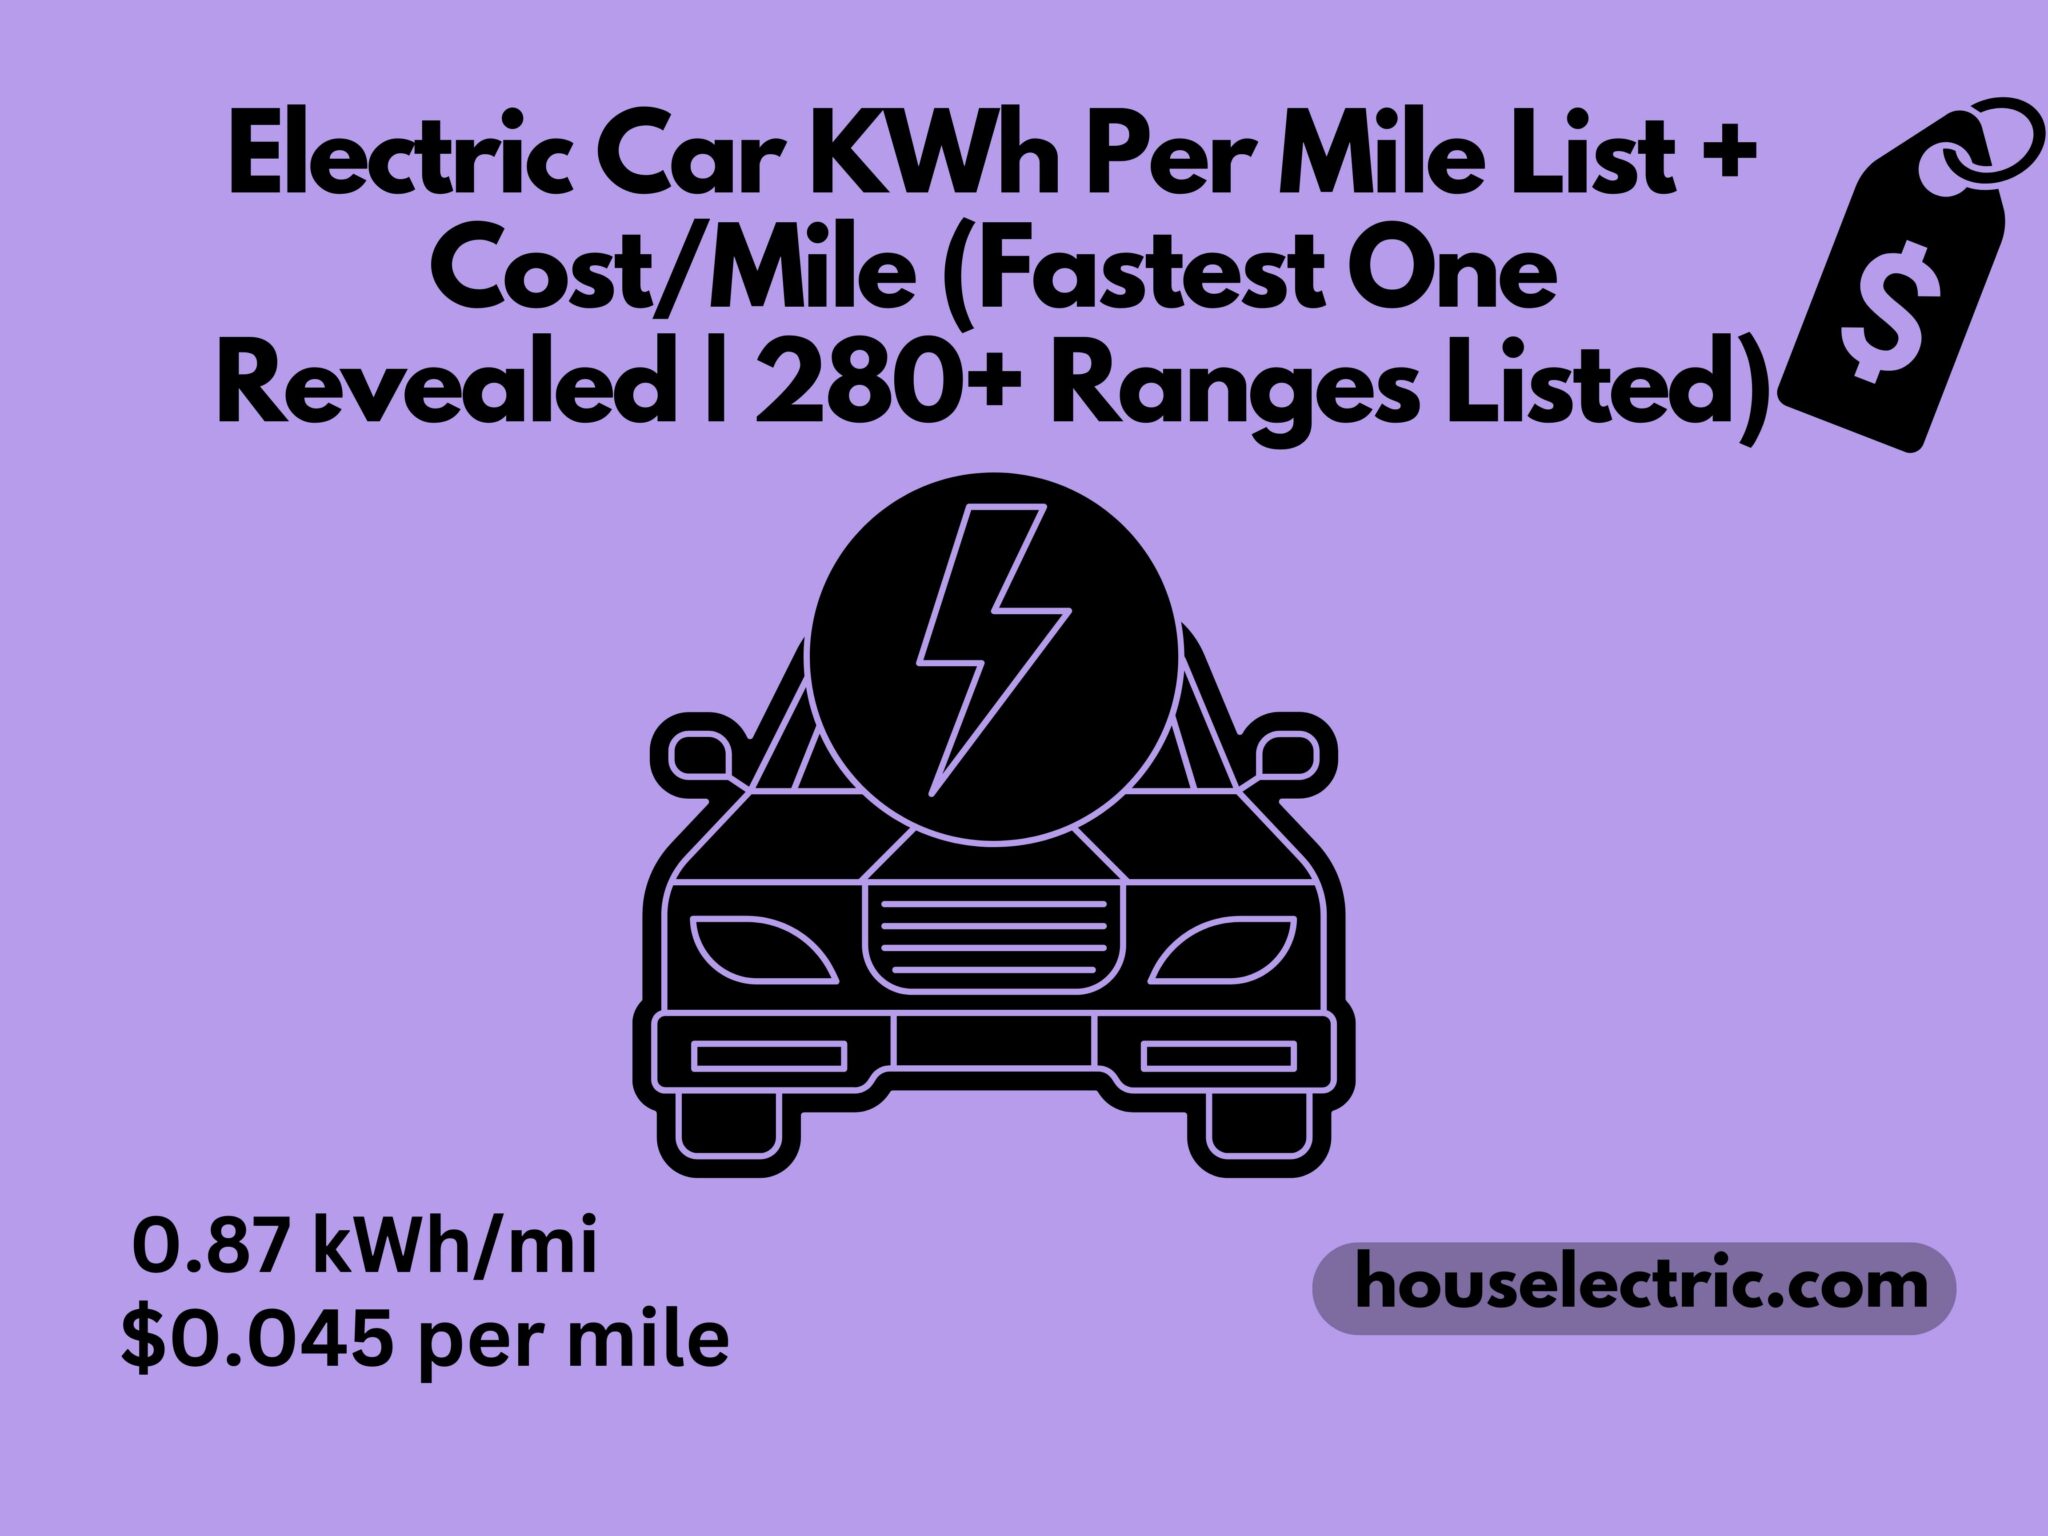 Electric Car KWh Per Mile List + Cost/Mile (Fastest One Revealed 280